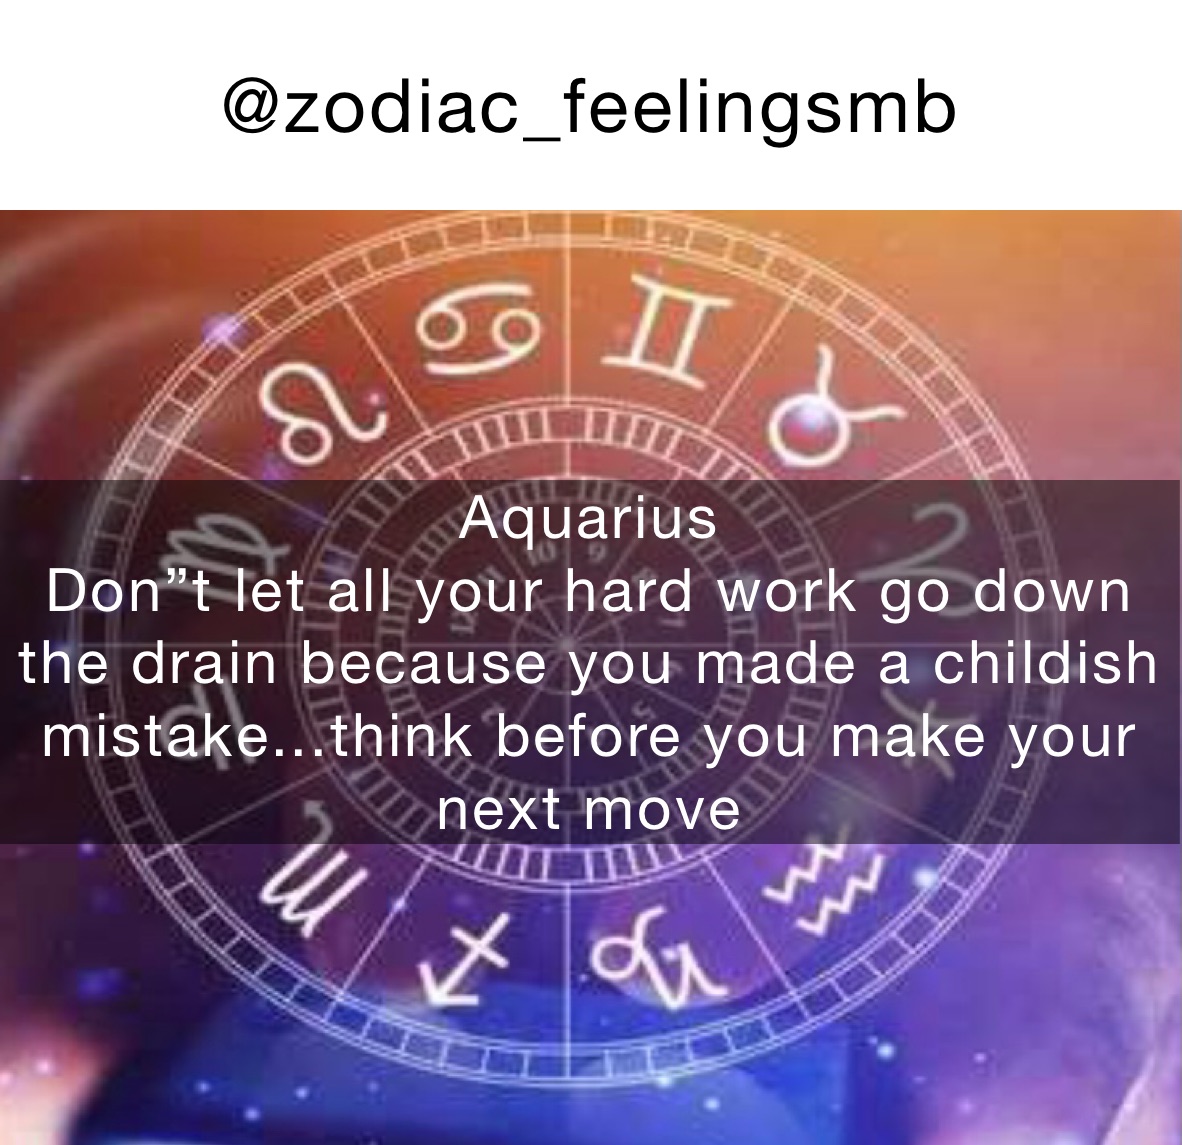 @zodiac_feelingsmb Aquarius 
Don”t let all your hard work go down the drain because you made a childish mistake...think before you make your next move